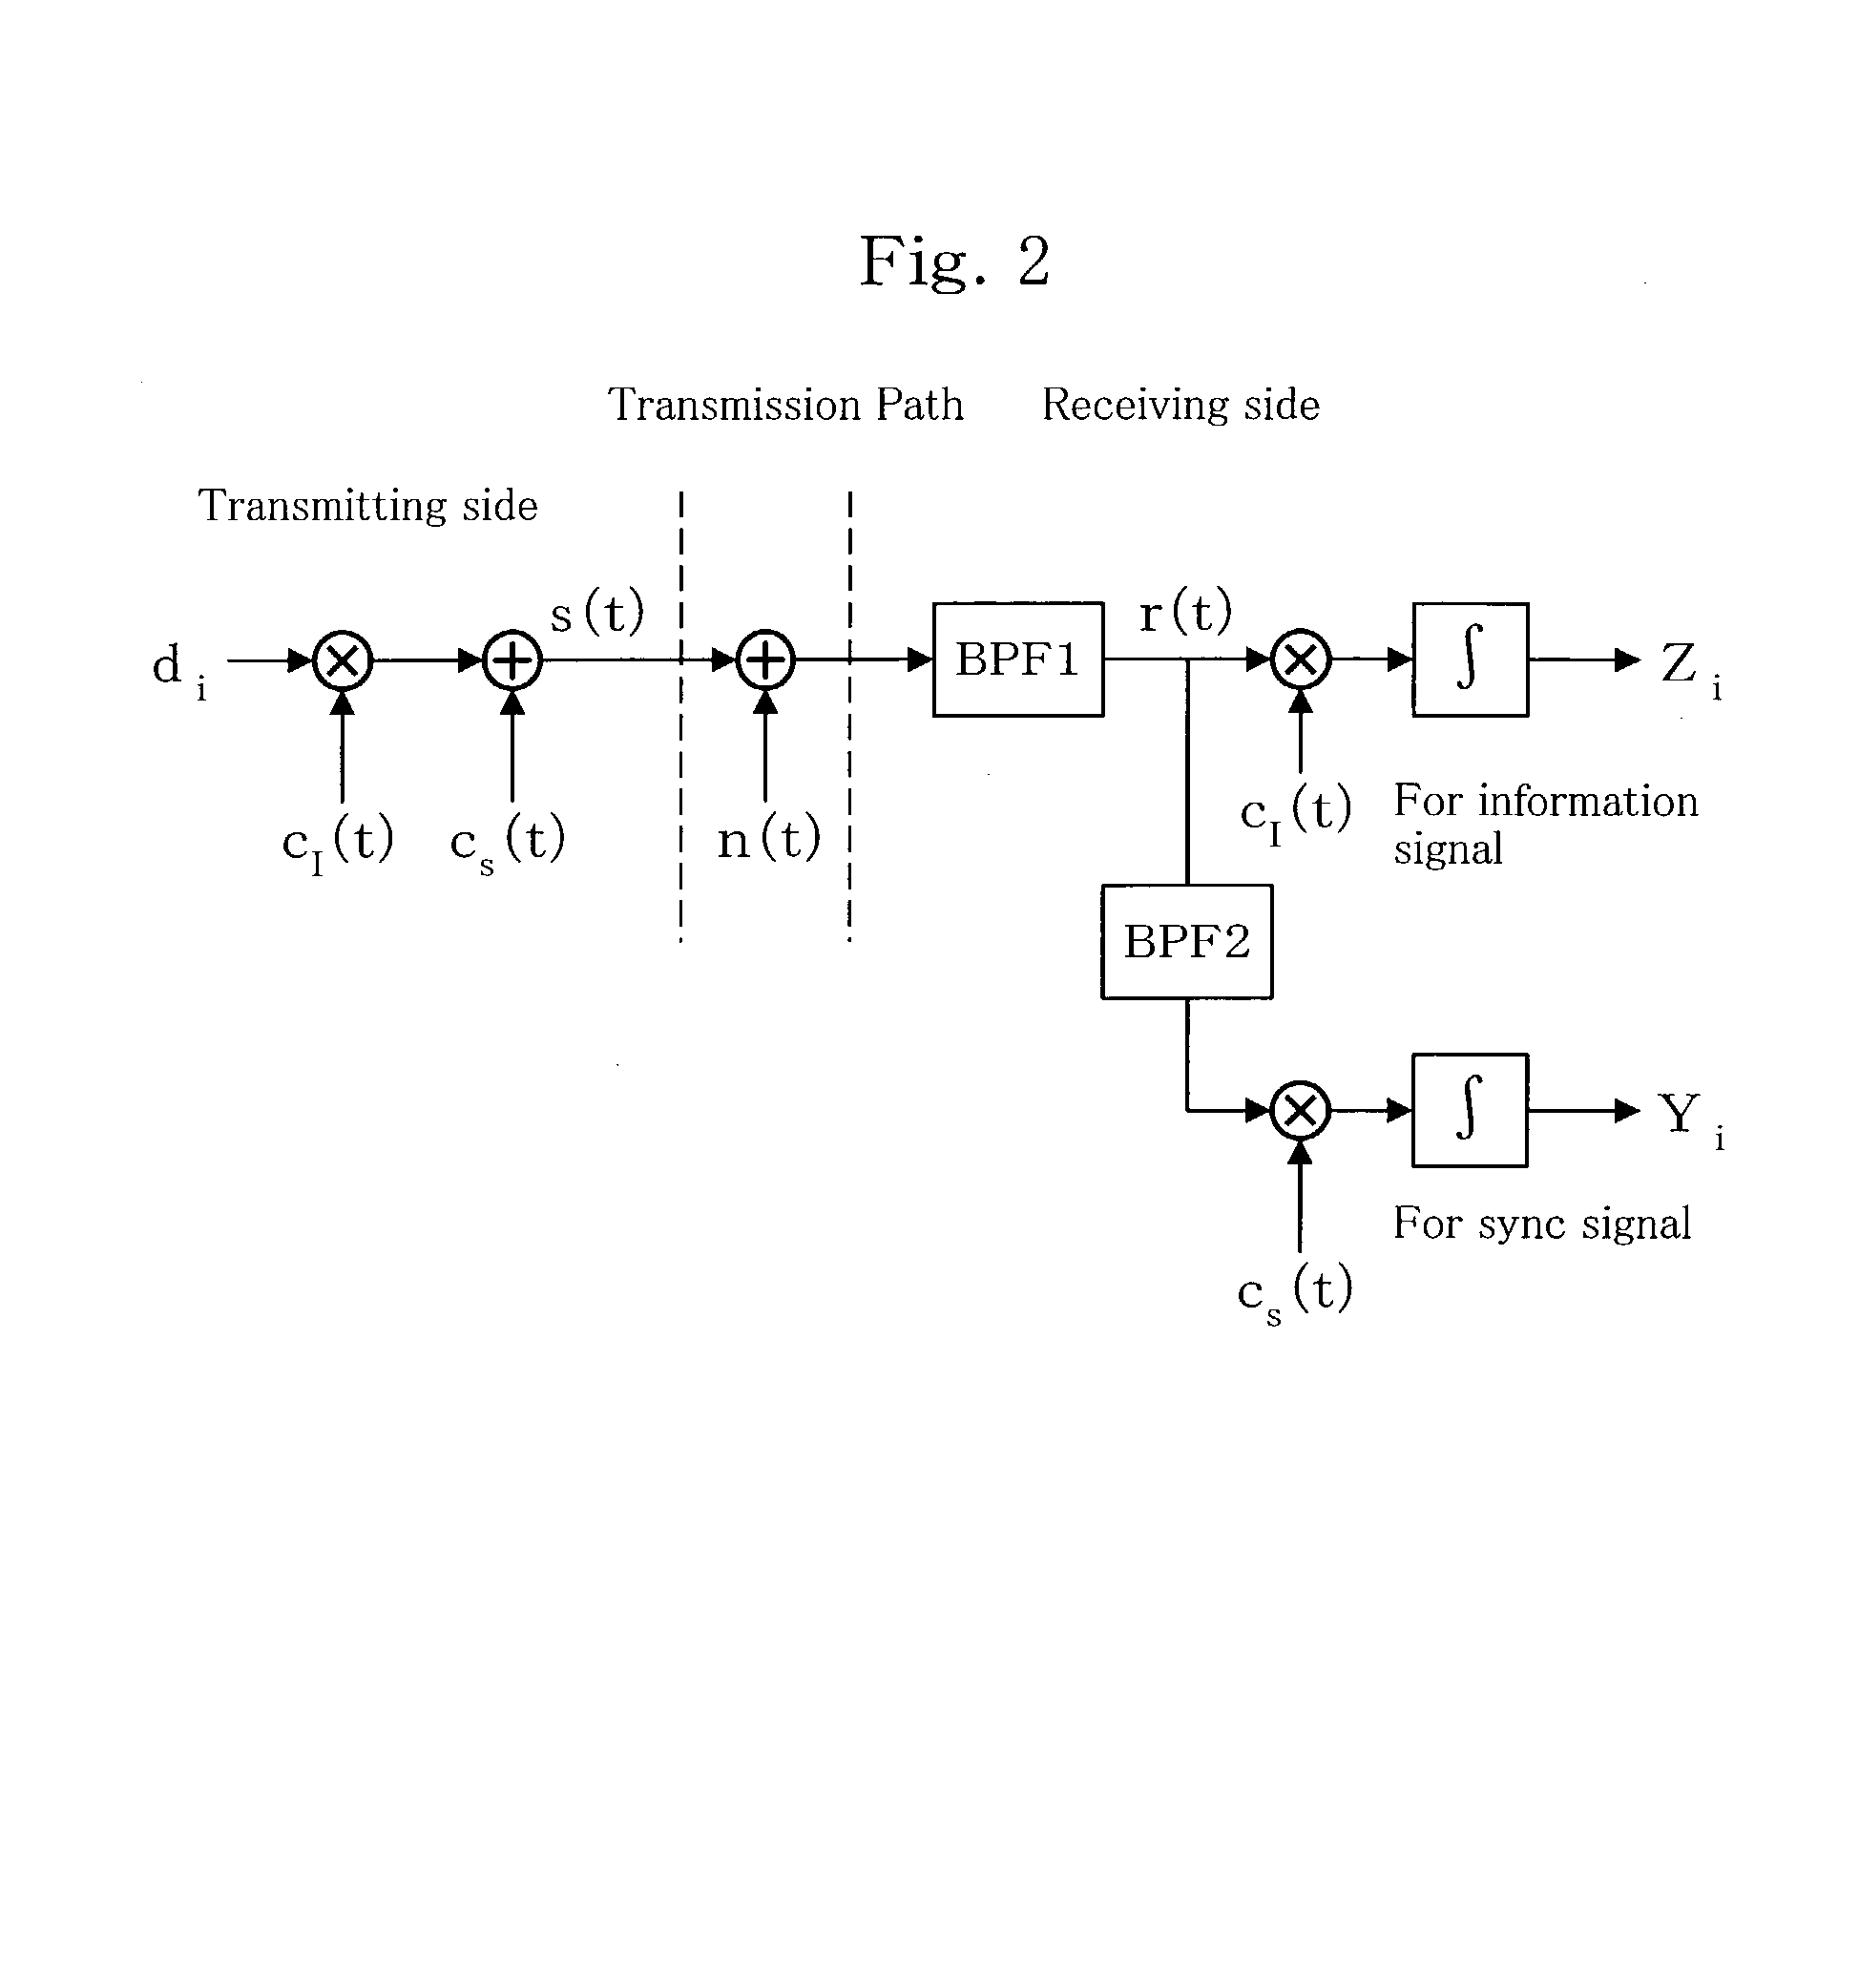 Wired spread spectrum communication device, a method for communication thereof, and a wired spread spectrum communication system